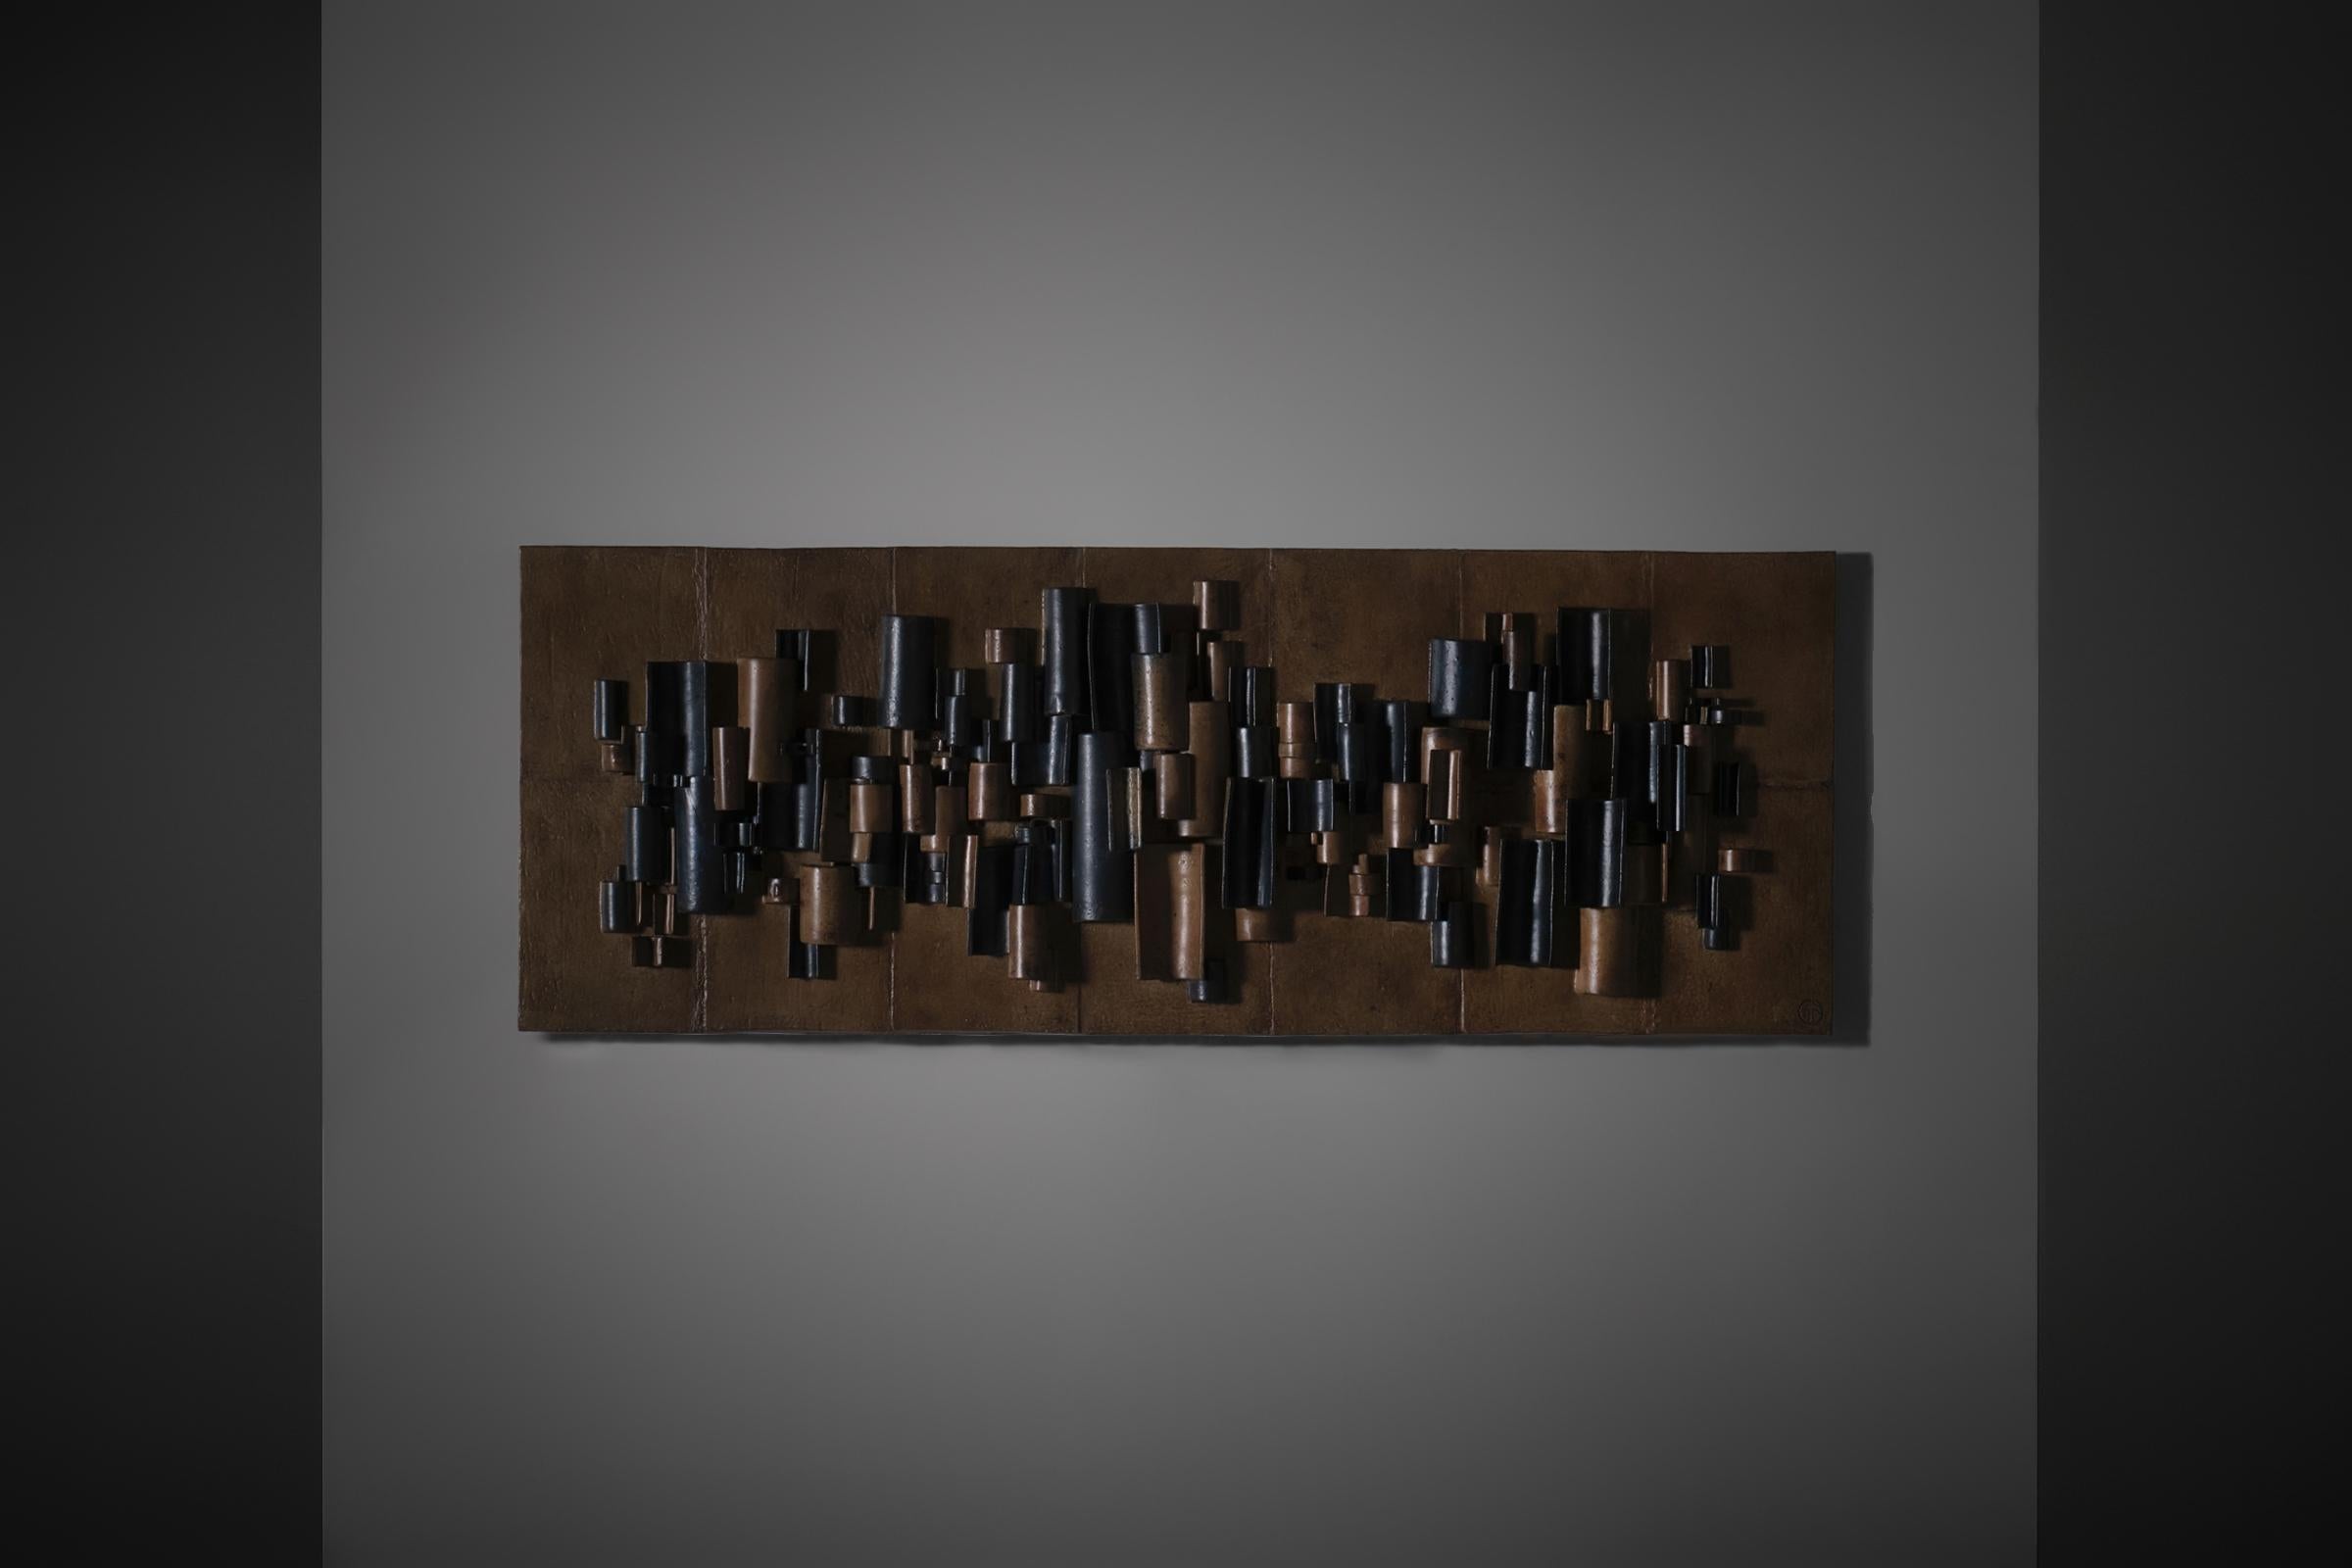 Large ceramic wall relief, 1970s. The panel shows a harmonious and rhythmic composition of cylindrical elements in different colors. The panel is composed of several large tiles fixed together and is mounted on a sturdy and strong wooden panel which